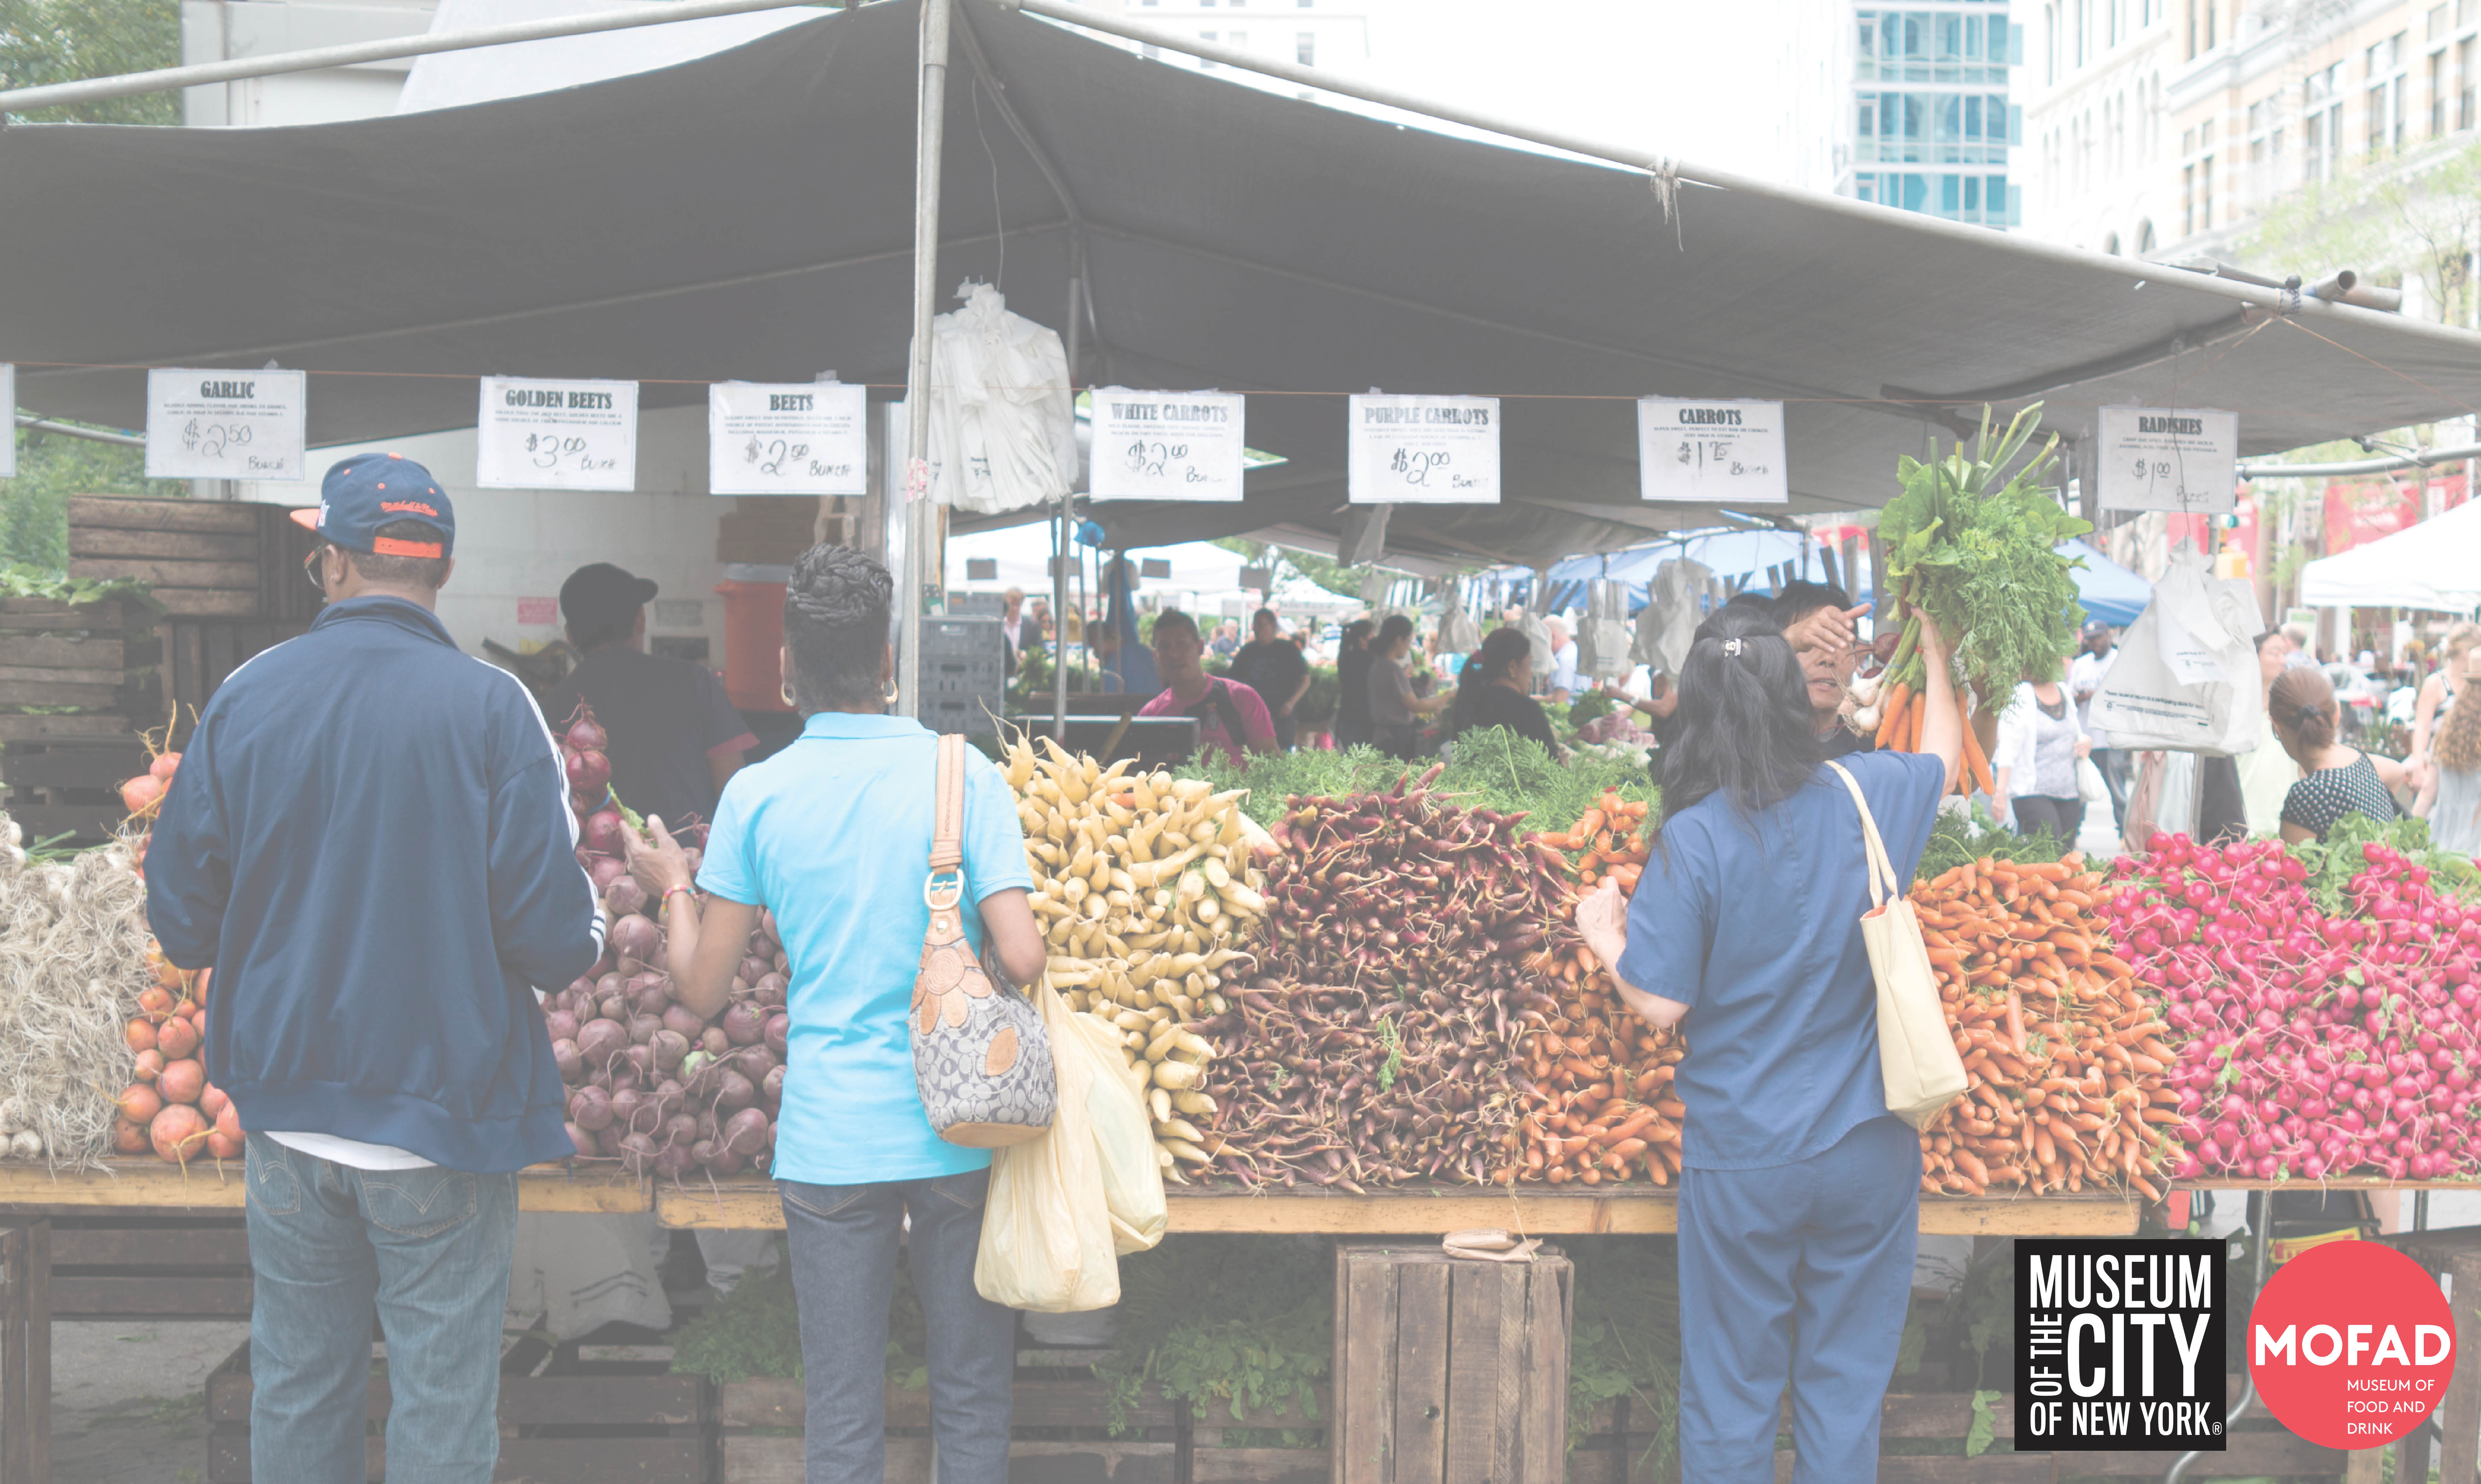 With their backs to the camera, three people are standing in front of a farmer’s market booth at the Union Square Greenmarket. There are stacks of garlic, beets, and carrots from left to right.  